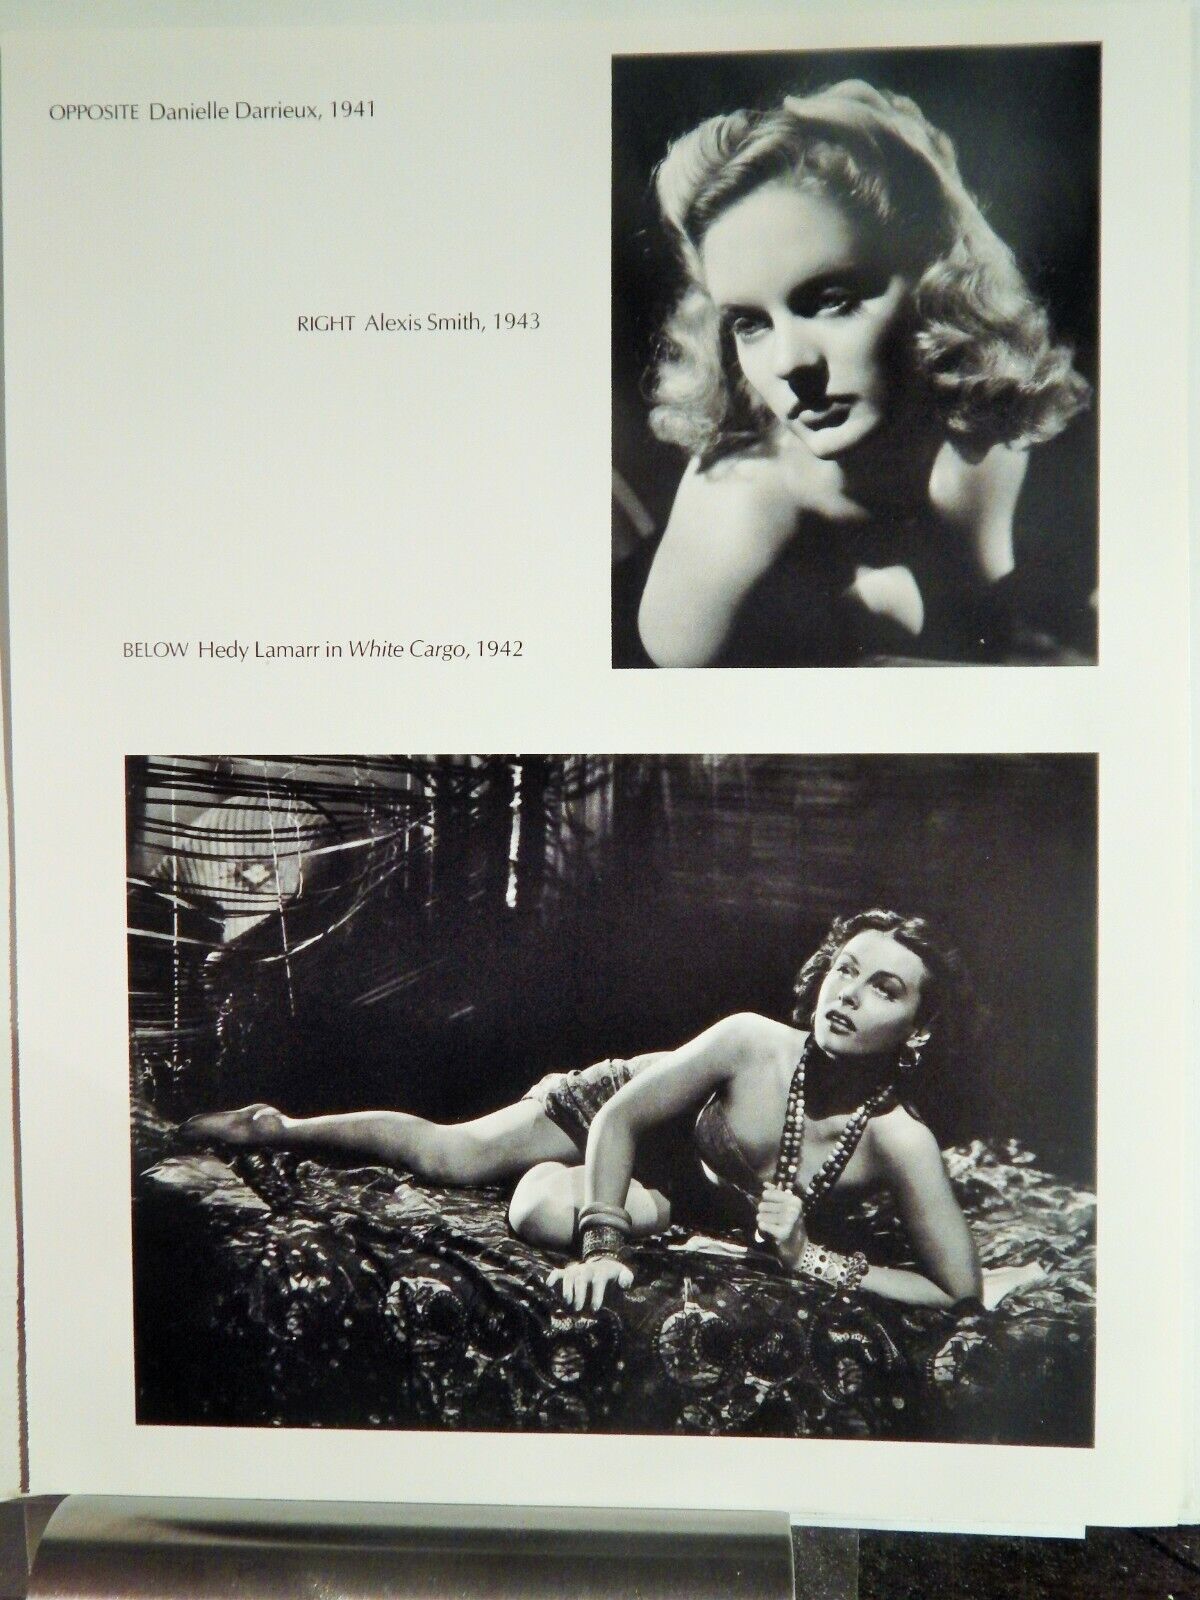 HEDY LAMARR/ ALEXIS SMITH/ GEORGE RAFT (1940S) MOVIE Photo Poster painting (1974 reprint)